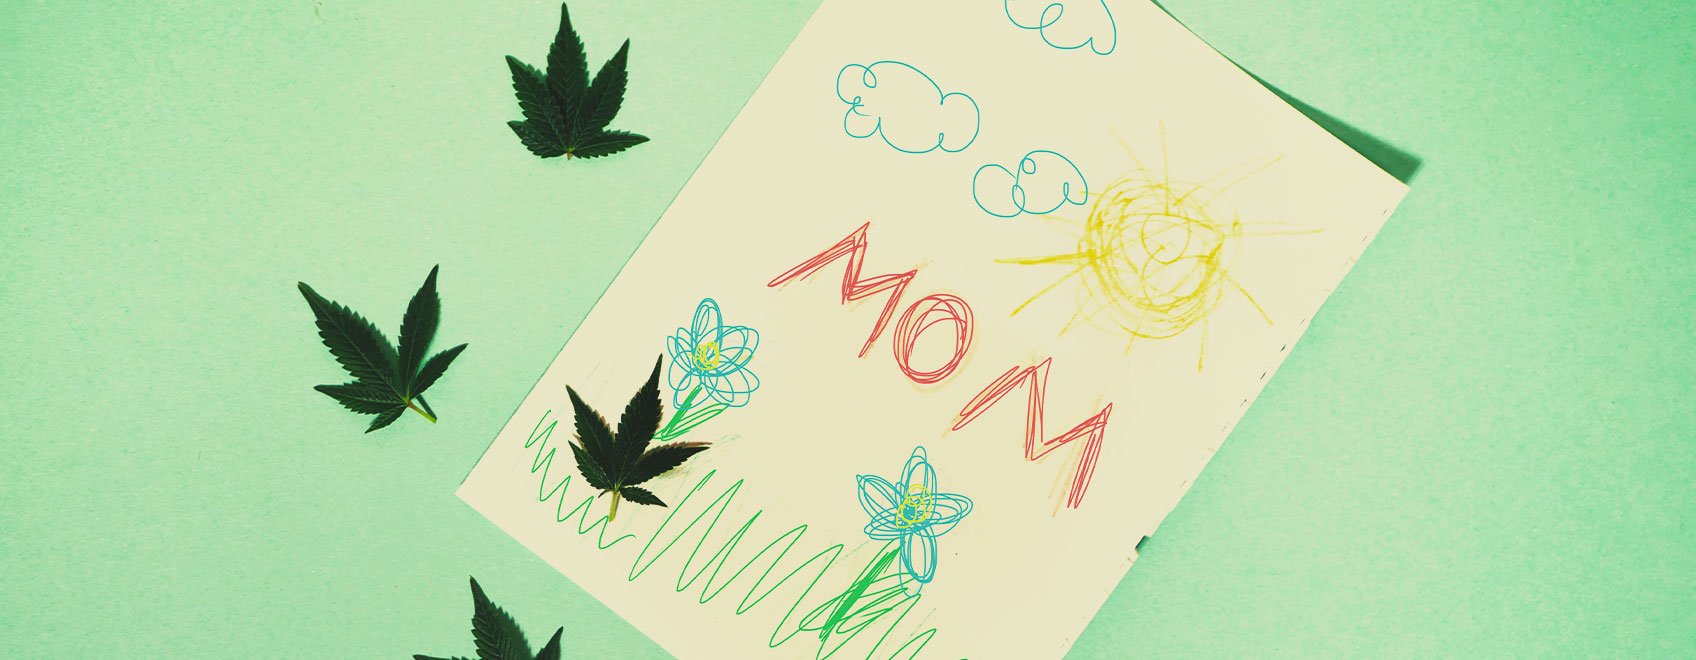 What is the most valuable thing about cannabis that our kids should learn from us?